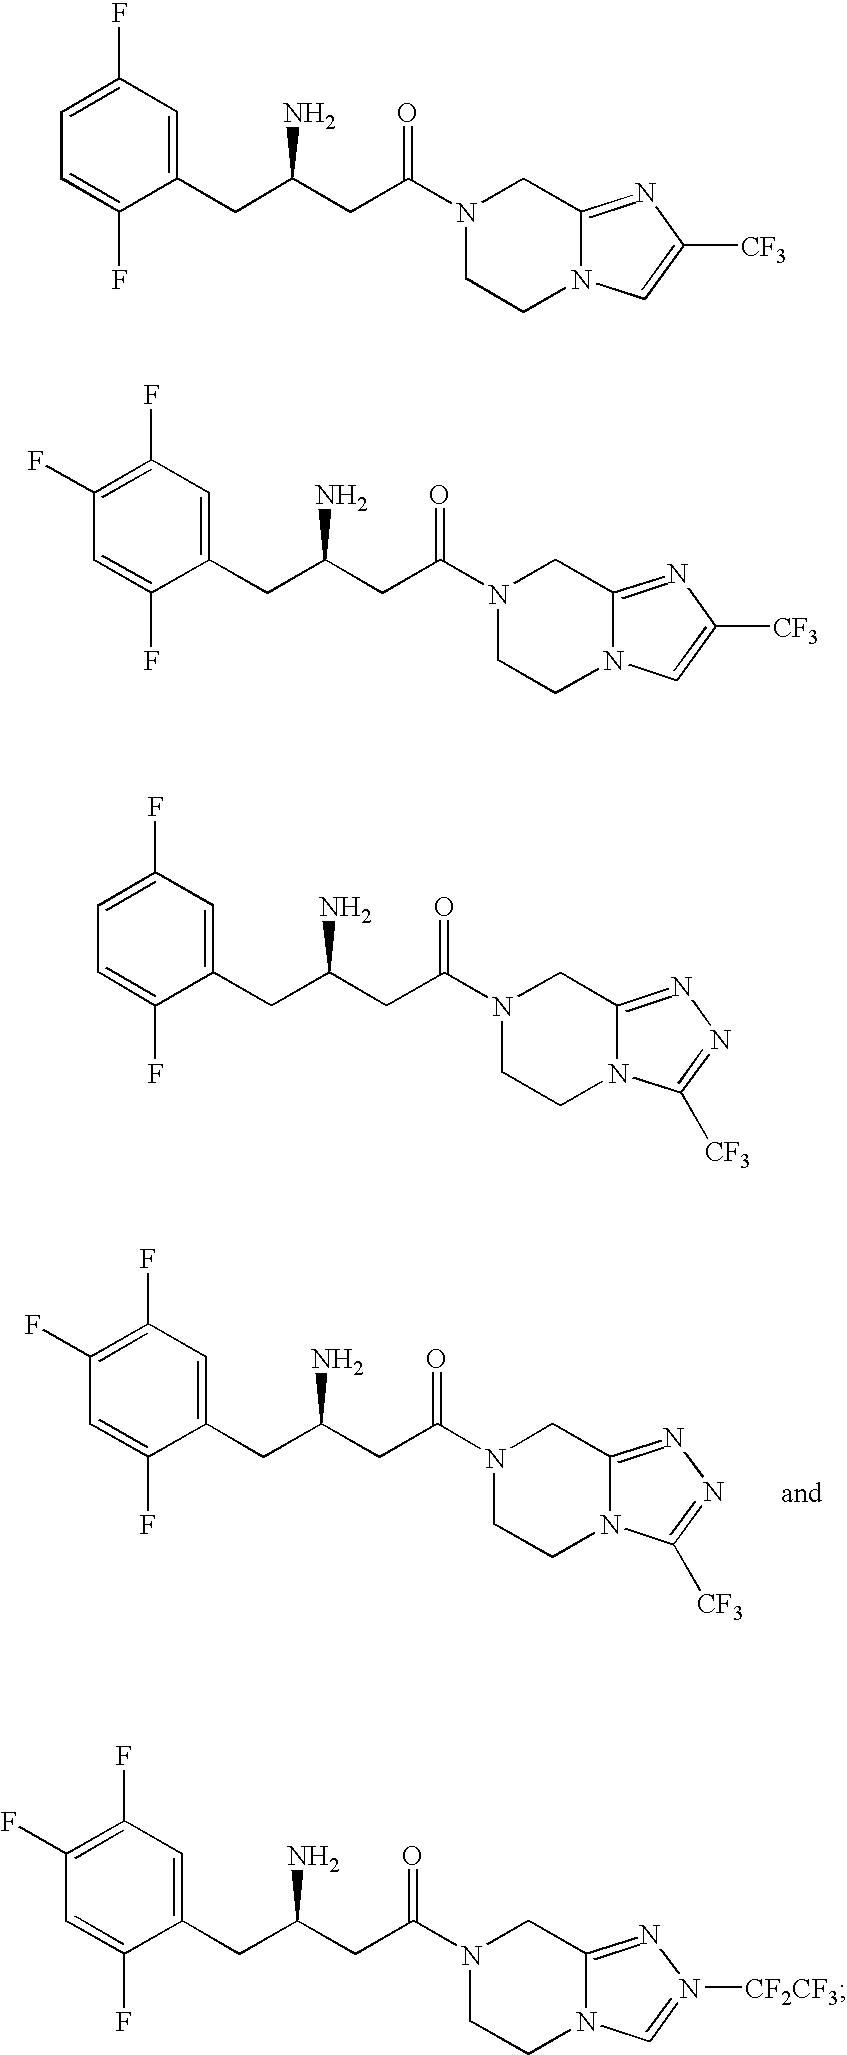 Combination of a Dipeptidyl Peptidase-4 Inhibitor and an Anti-Hypertensive Agent for the Treatment of Diabetes and Hypertension